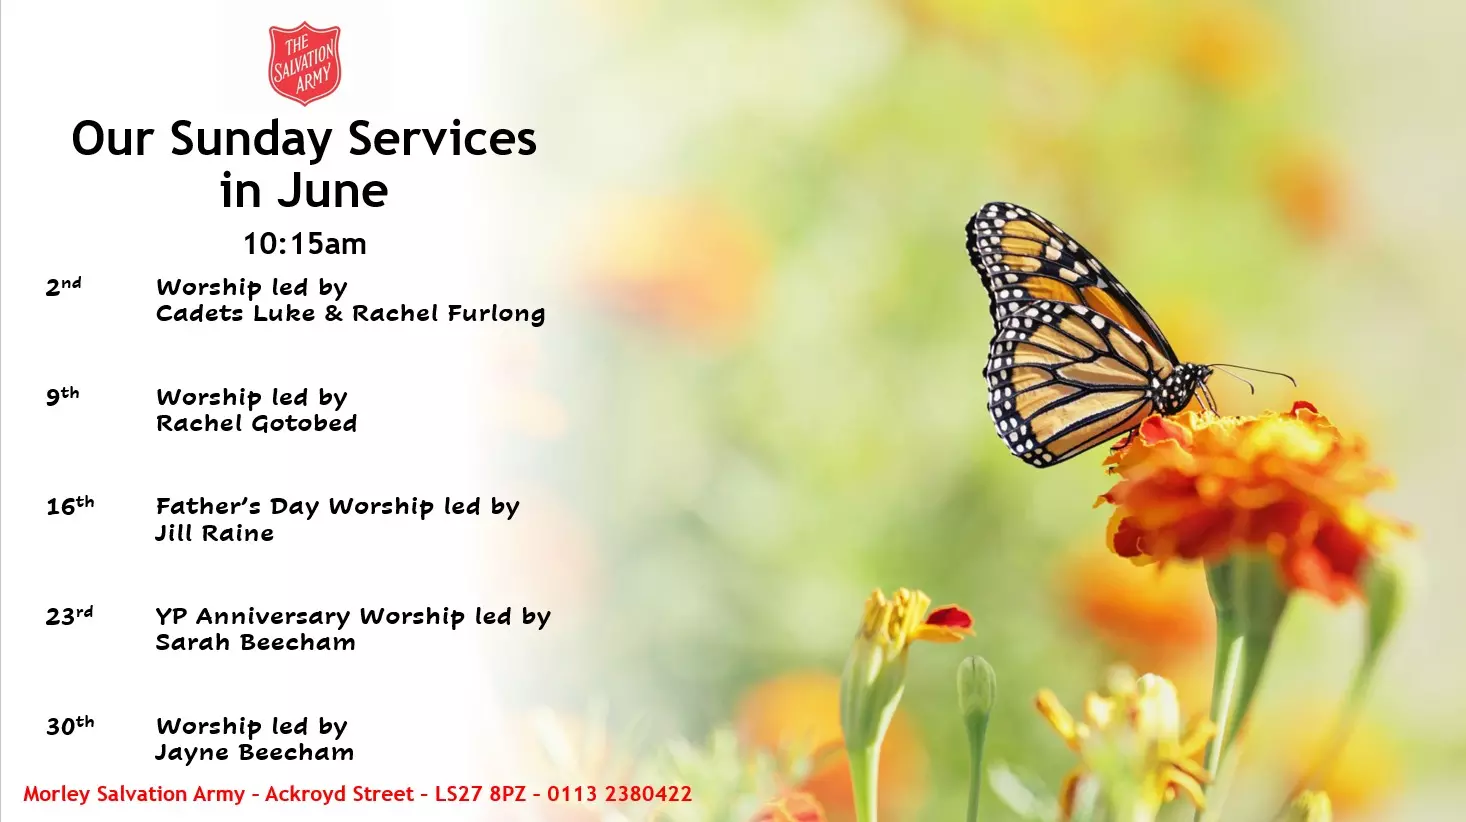 Who is leading our Sunday services in June